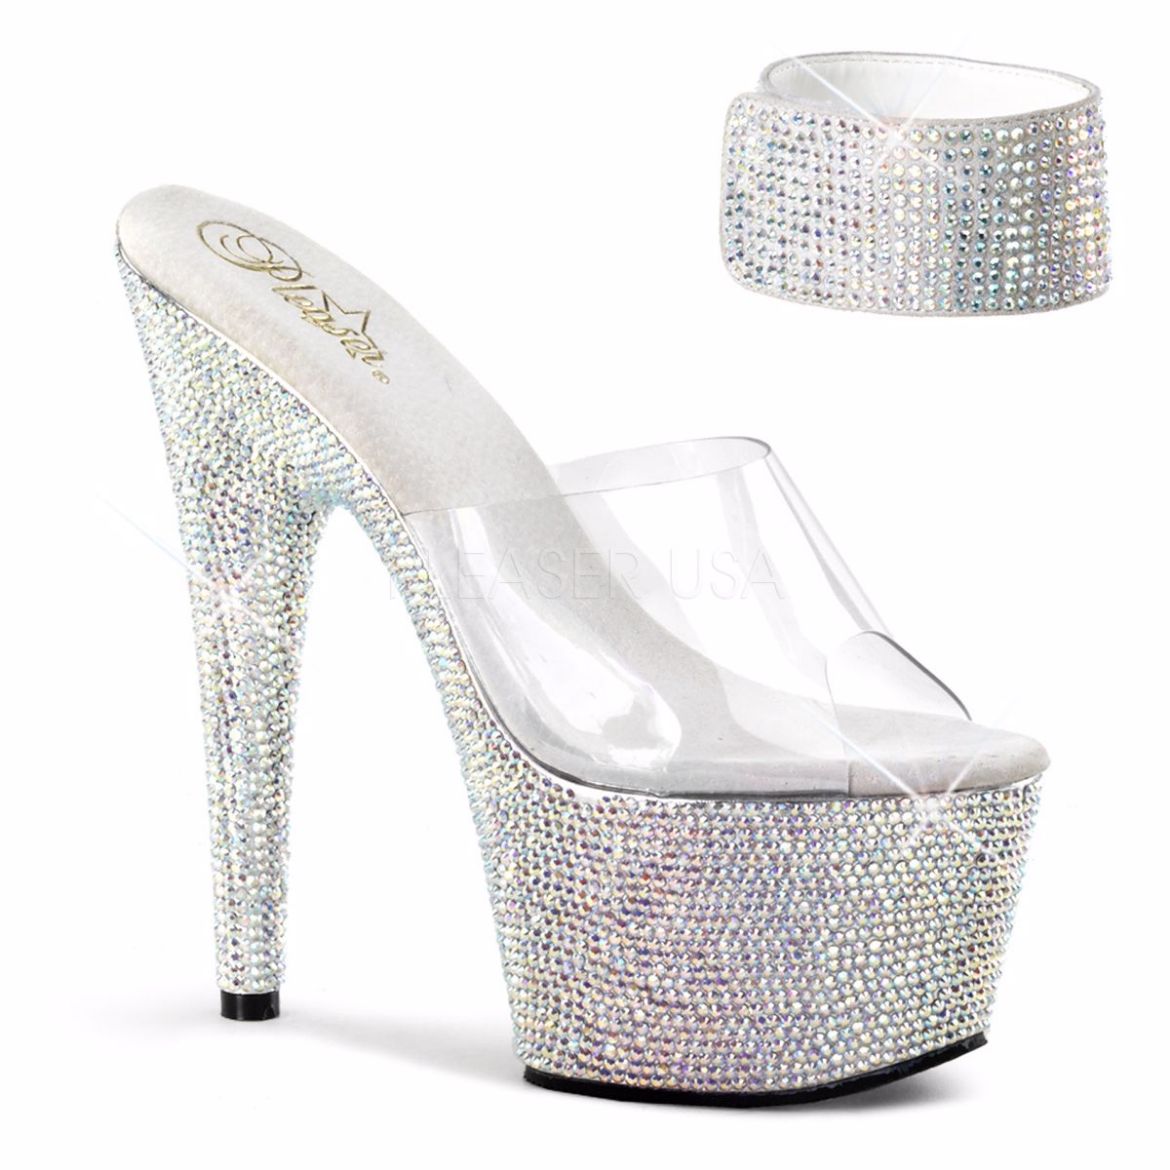 Product image of Pleaser Bejeweled-712Rs Clear/Silver Multi Rhinestone, 7 inch (17.8 cm) Heel, 2 3/4 inch (7 cm) Platform Sandal Shoes